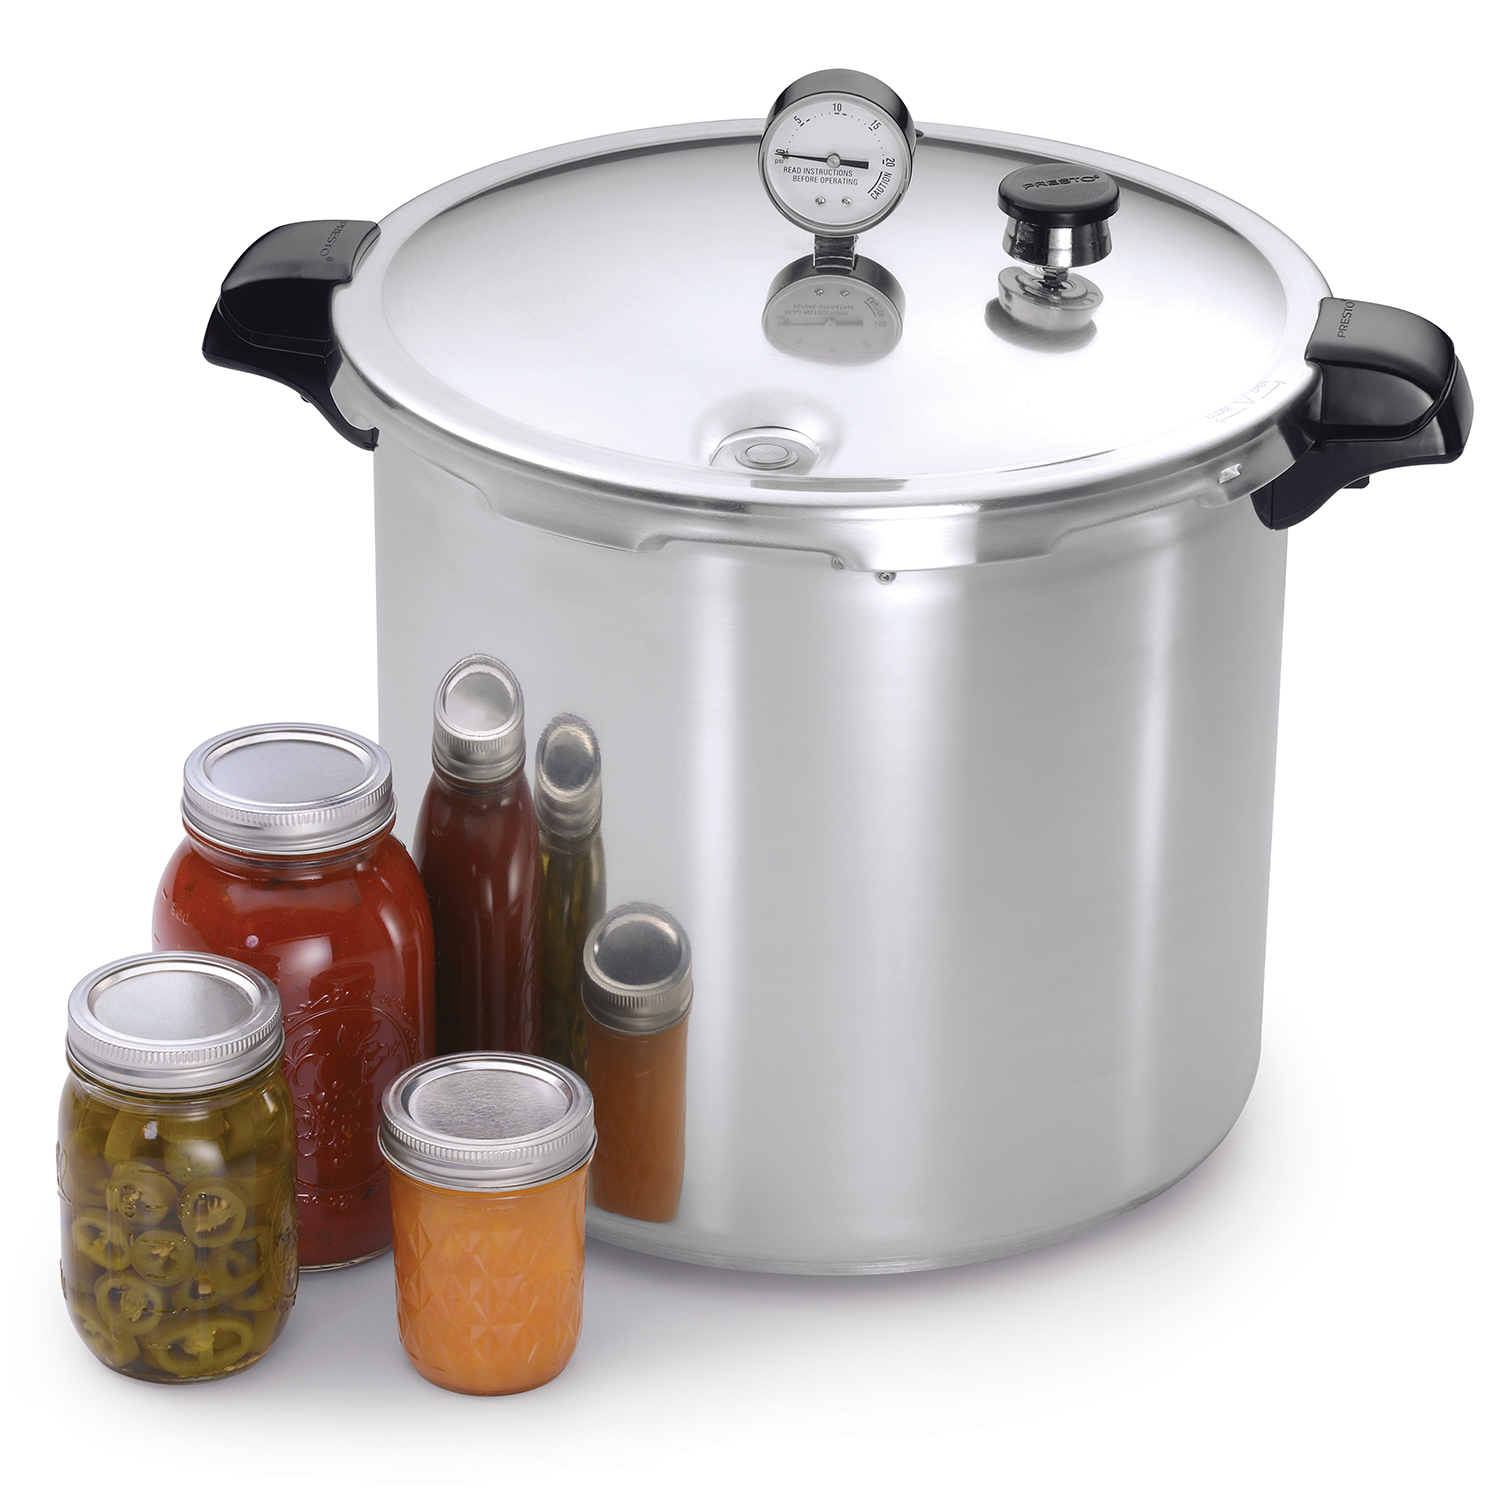 Selecting the Best Pressure Canner for the Job